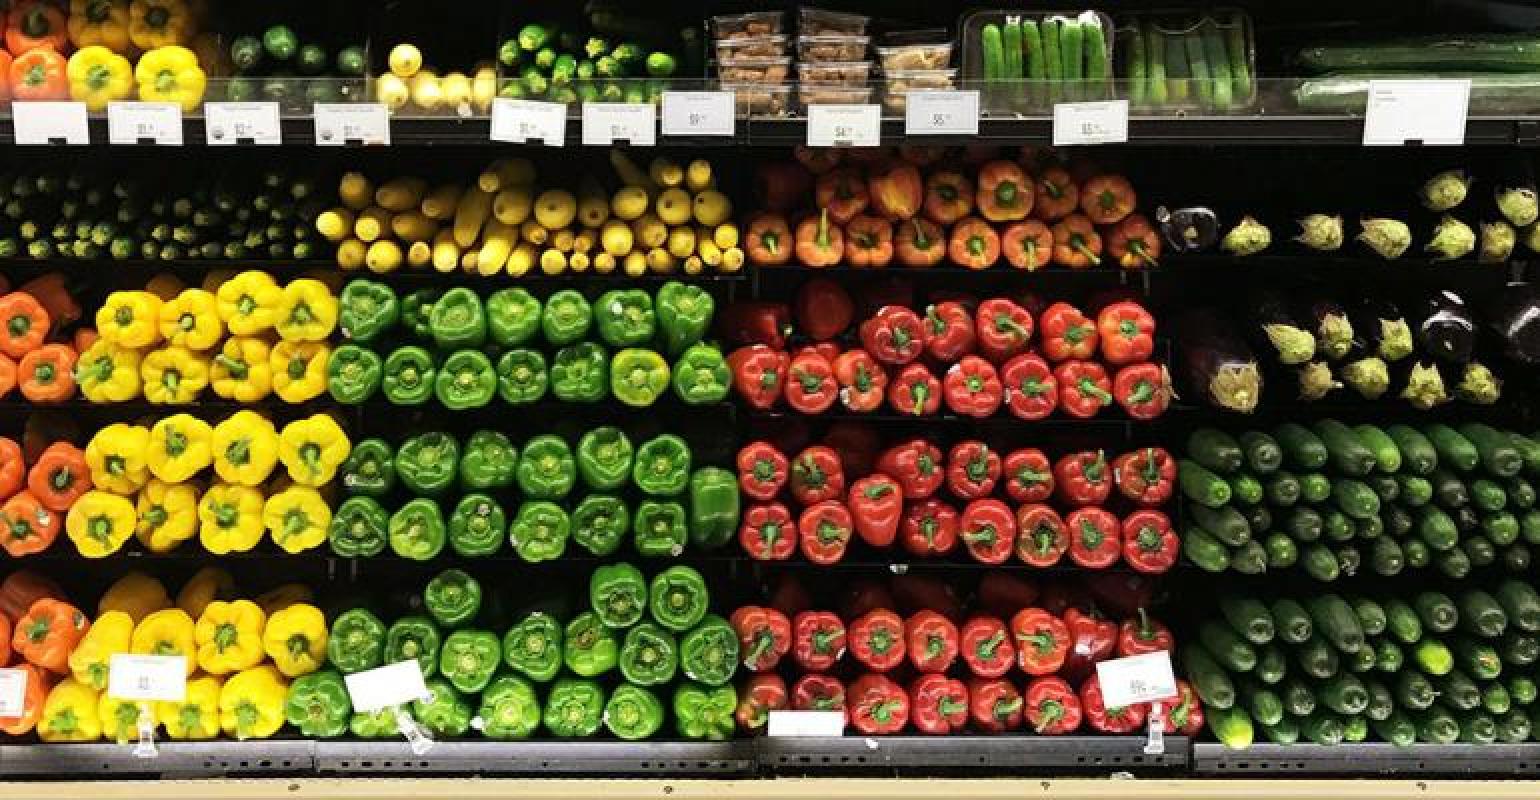 Fresh produce shoppers look to reduce carbon footprint by buying